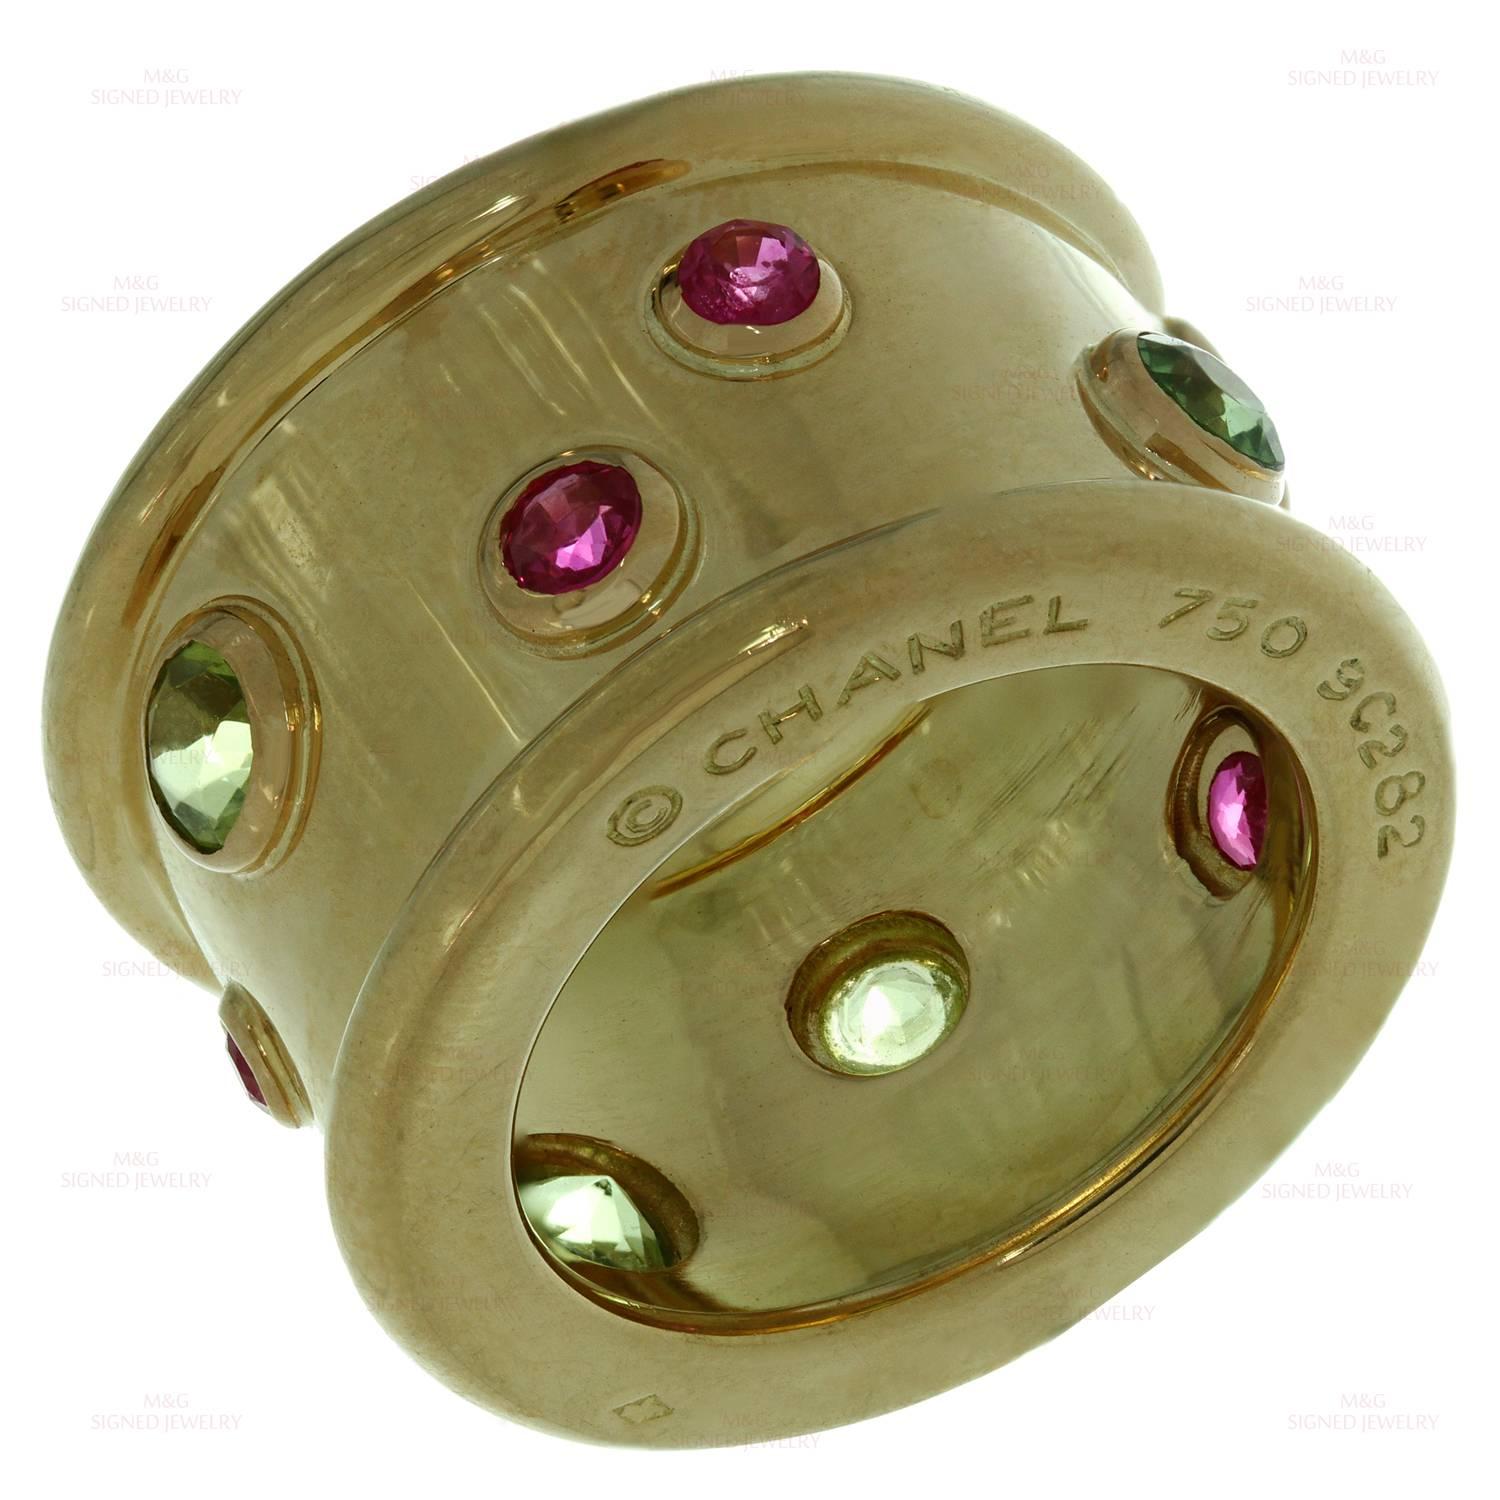 This elegant Chanel ring is crafted in 18k yellow gold and beautifully bezel-set with multi-sized round faceted rubies and peridots. Made in France circa 1990s. Measurements: 0.55